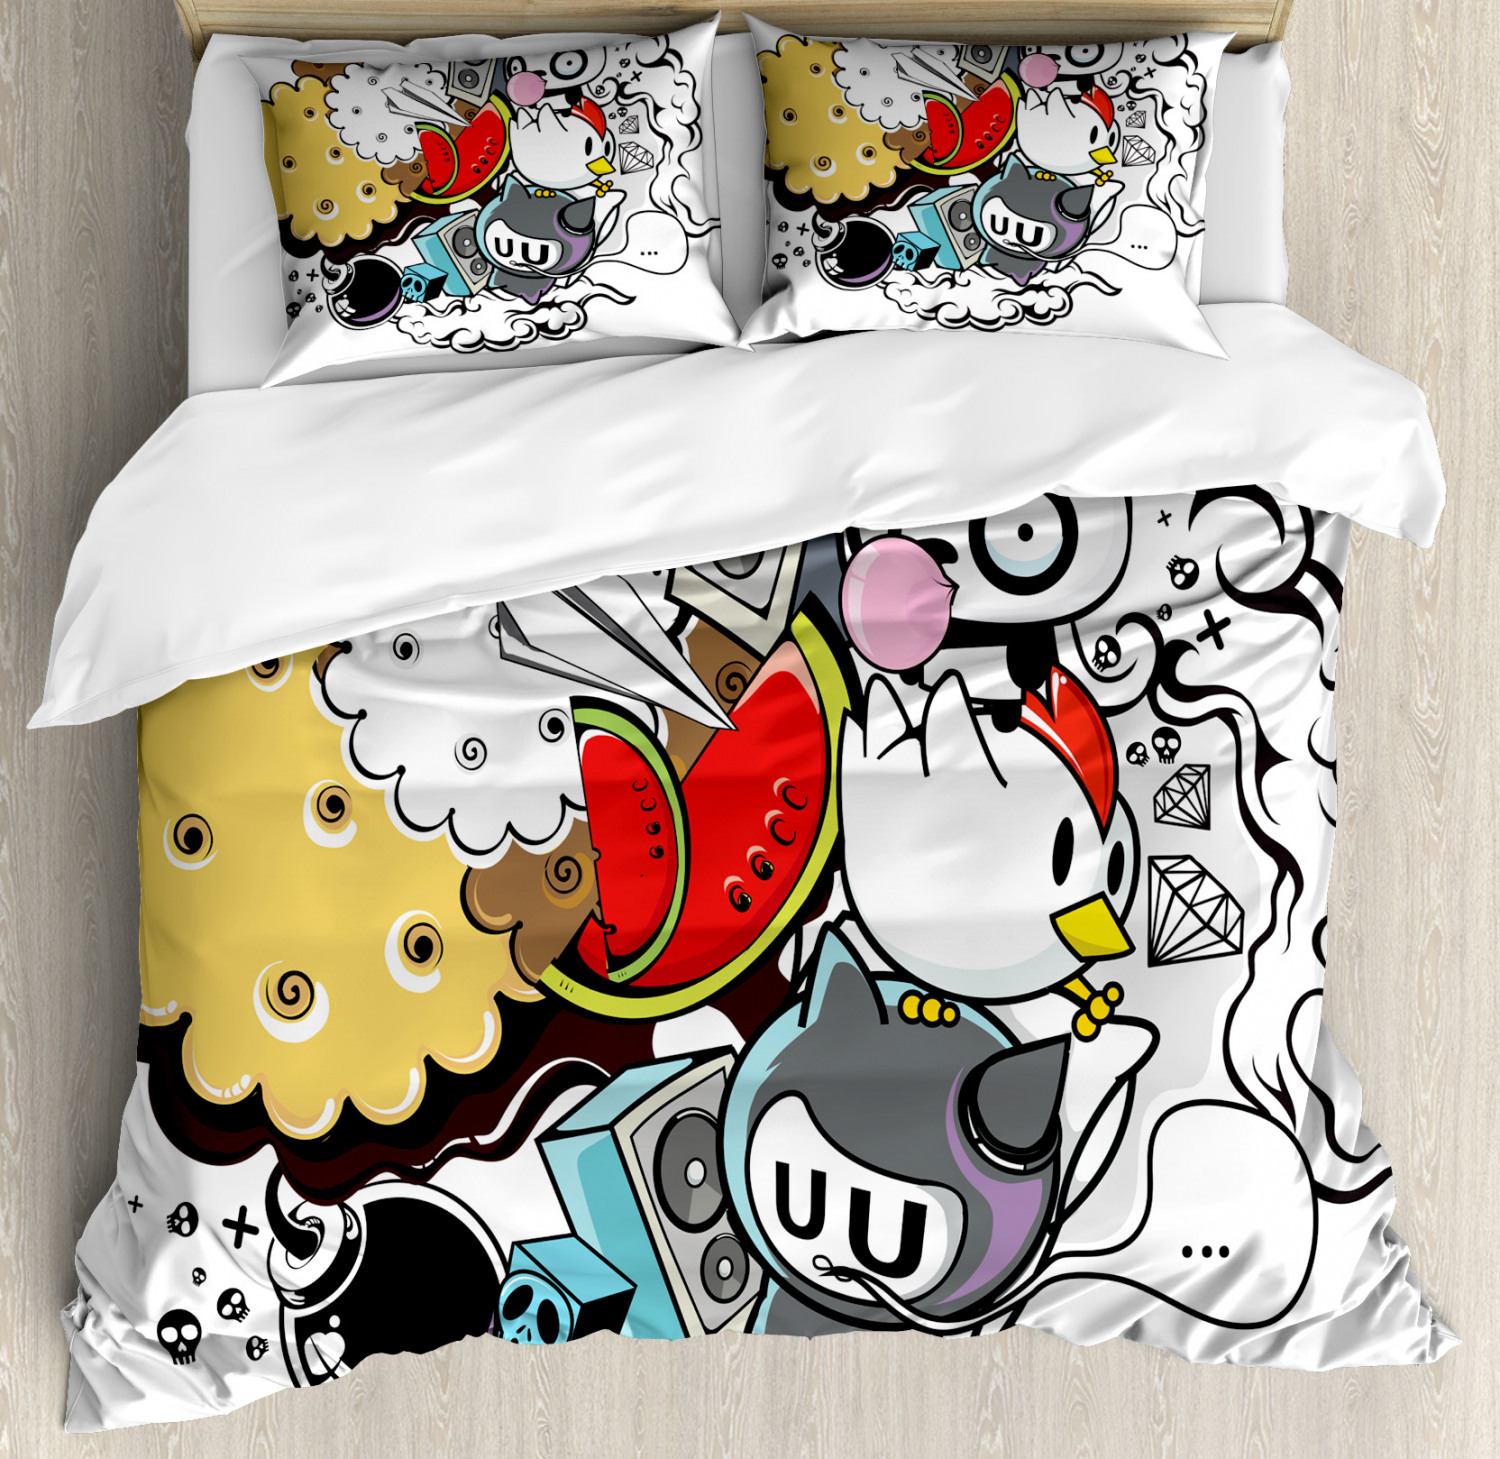 Indie Duvet Cover Set With Pillow Shams Animal Food Crazy Sketch